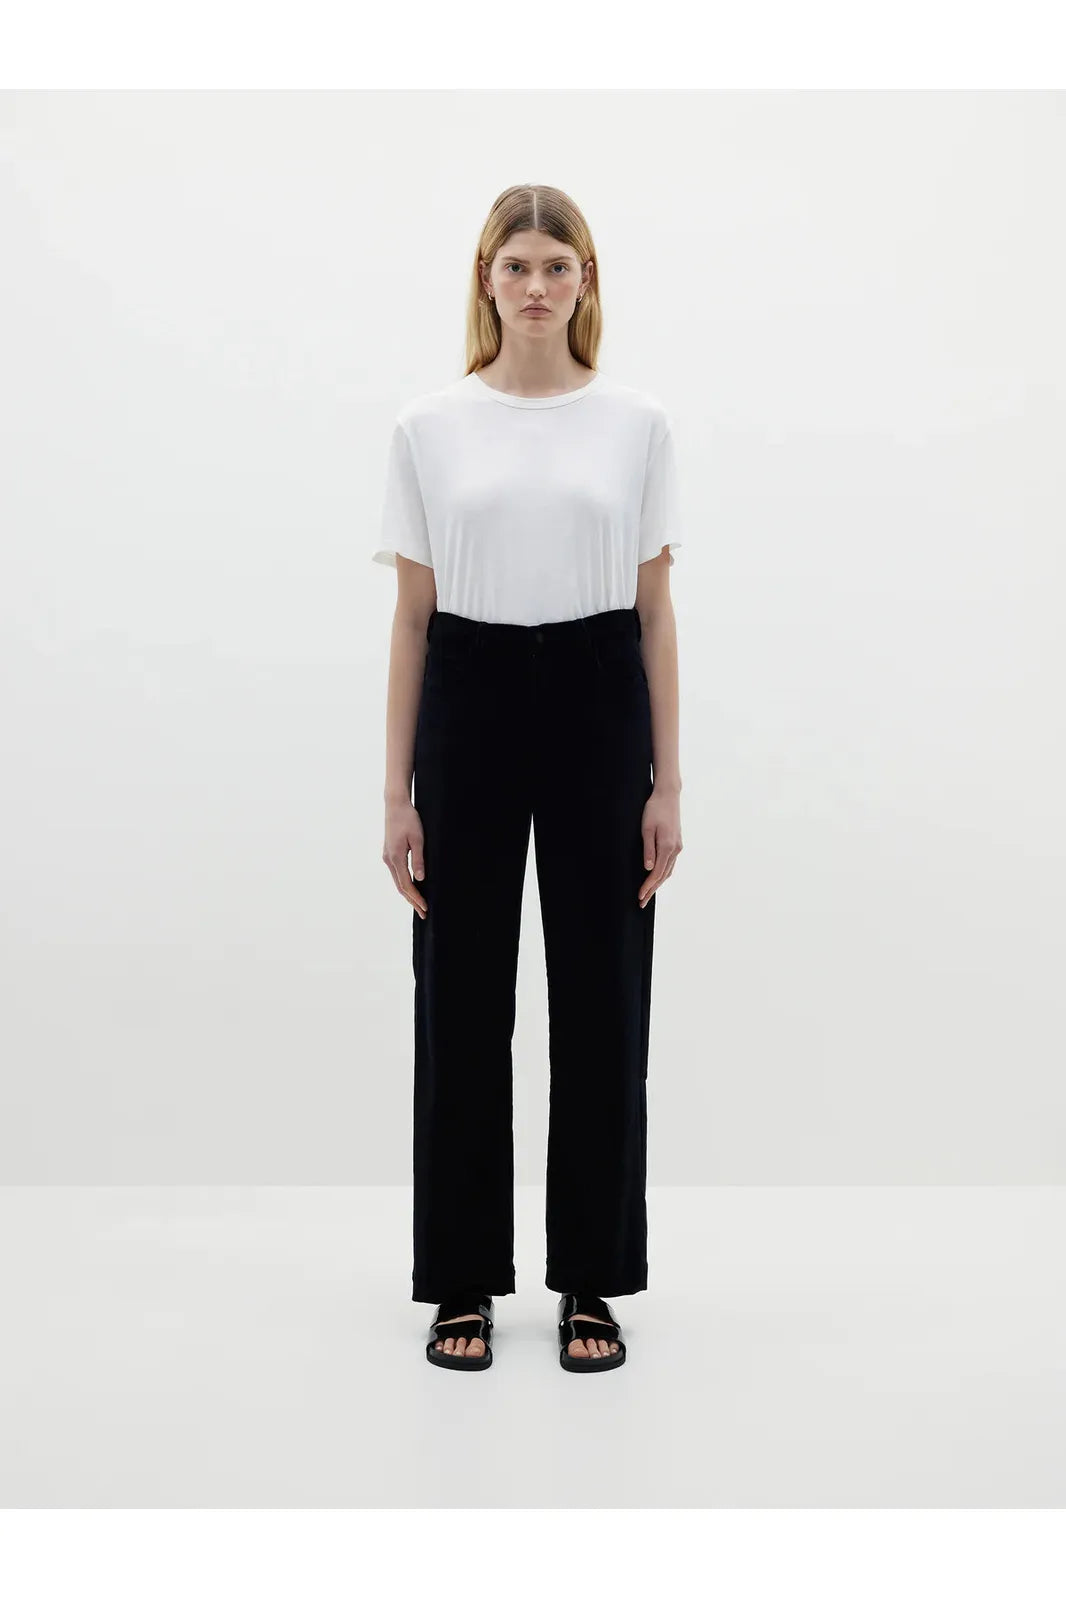 Cord Straight Leg Pant in Black by Bassike